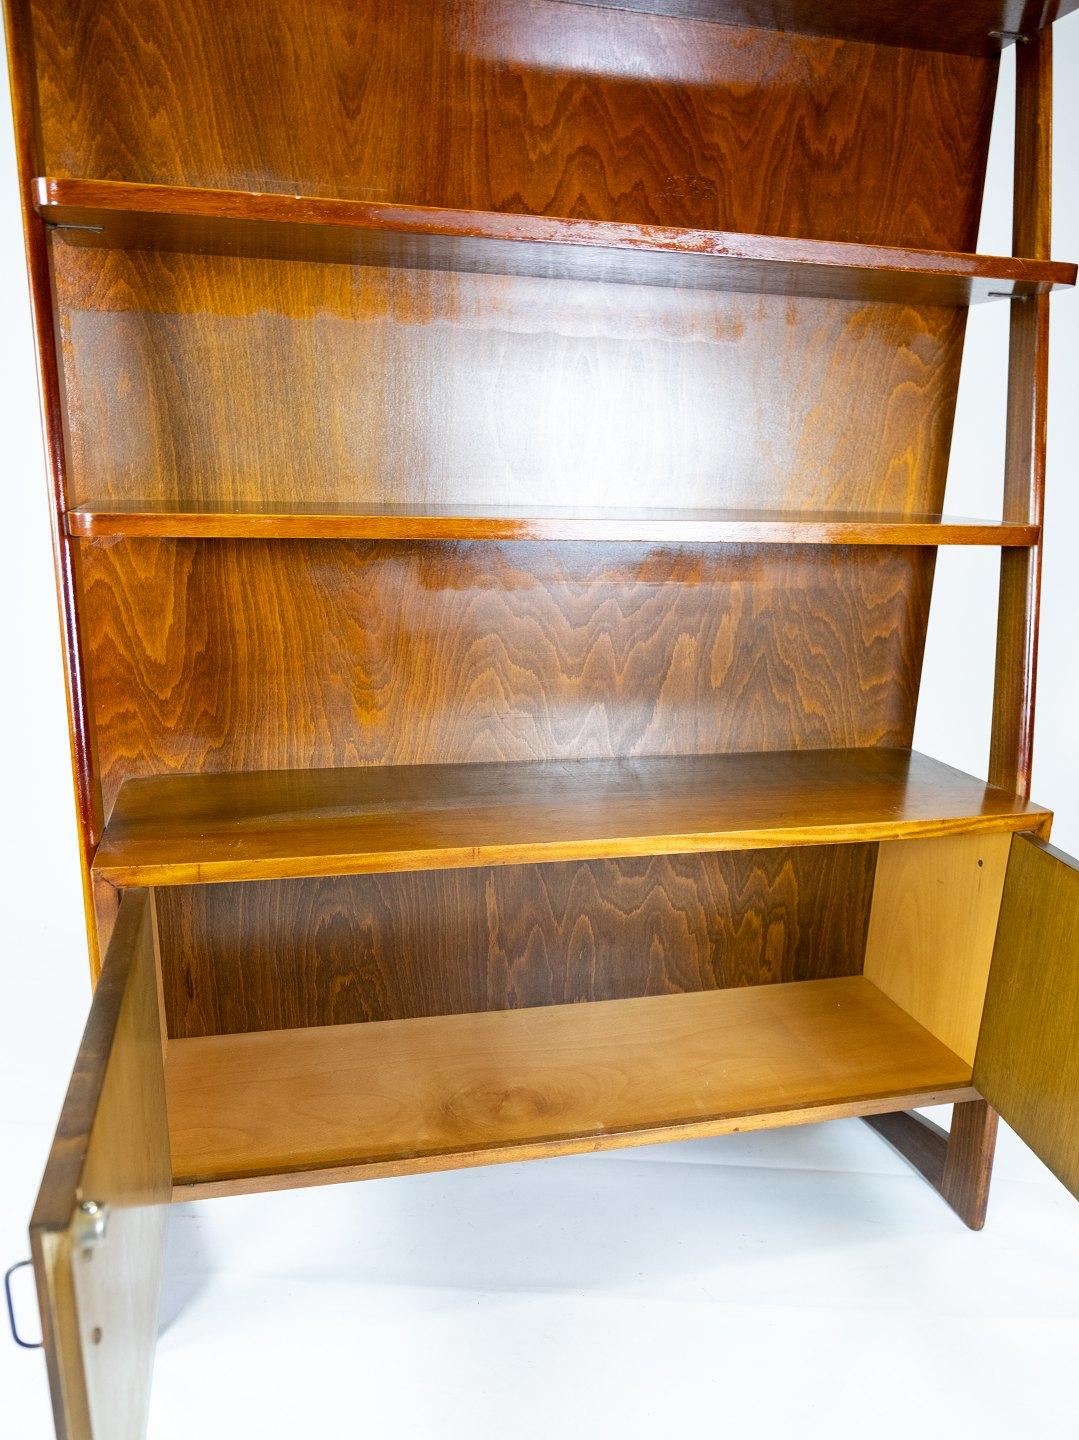 Scandinavian Modern Bookcase with Cabinet Beneath in Walnut of Danish Design from the 1950s